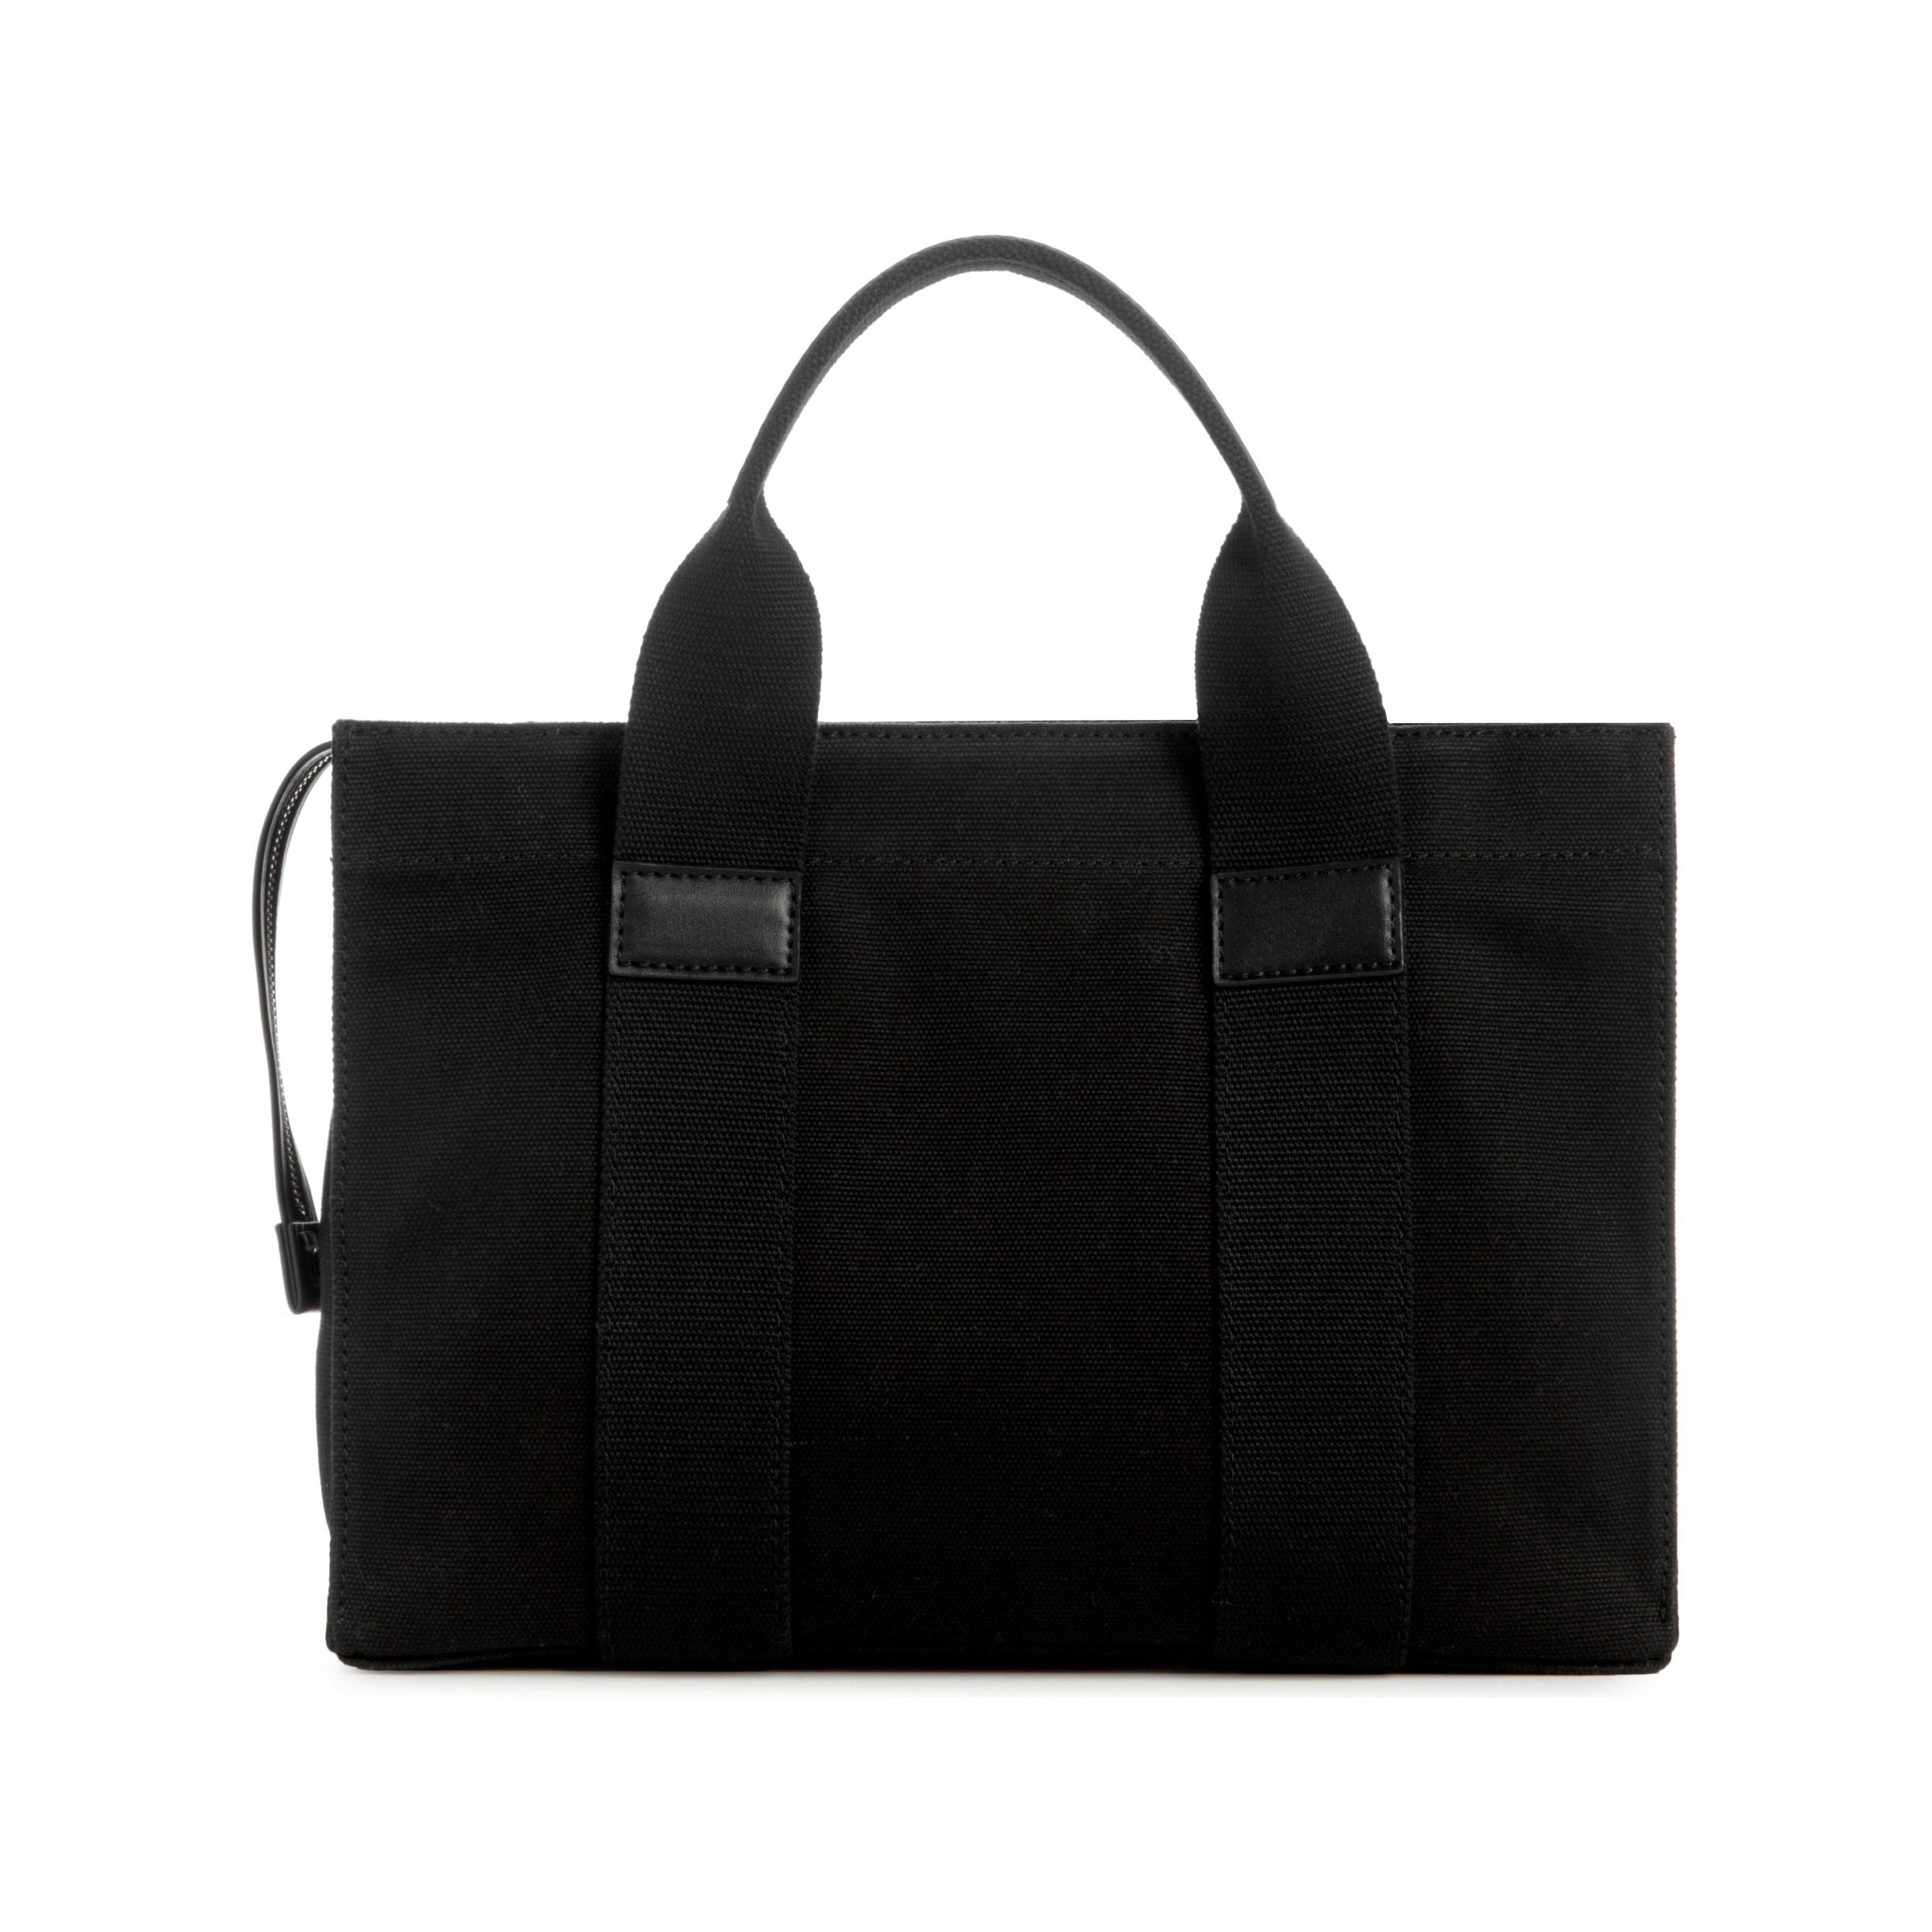 Guess - Canvas Tote in Black